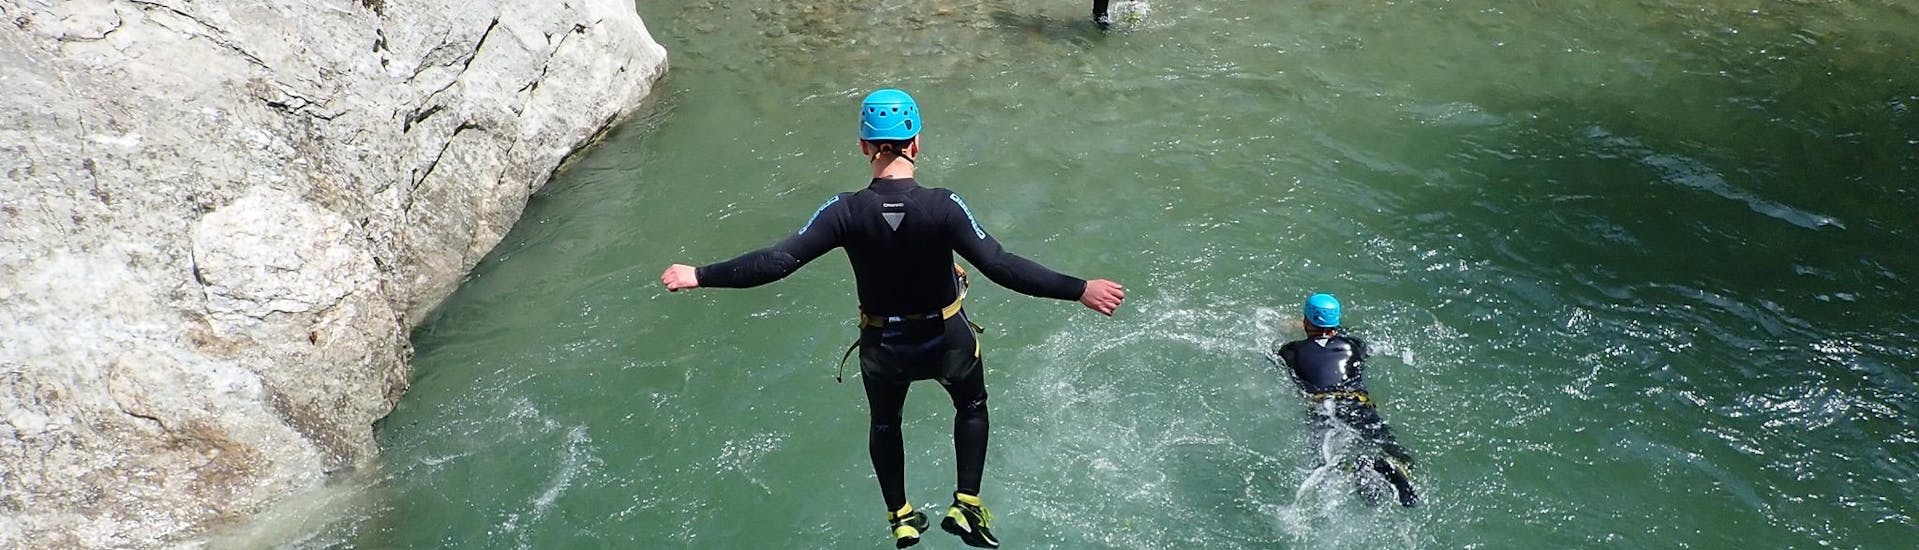 A participant of the Canyoning for Kids & Teens in Zemmschlucht - Jump & Run with Mountain Sports Mayrhofen is taking a jump into a natural pool.